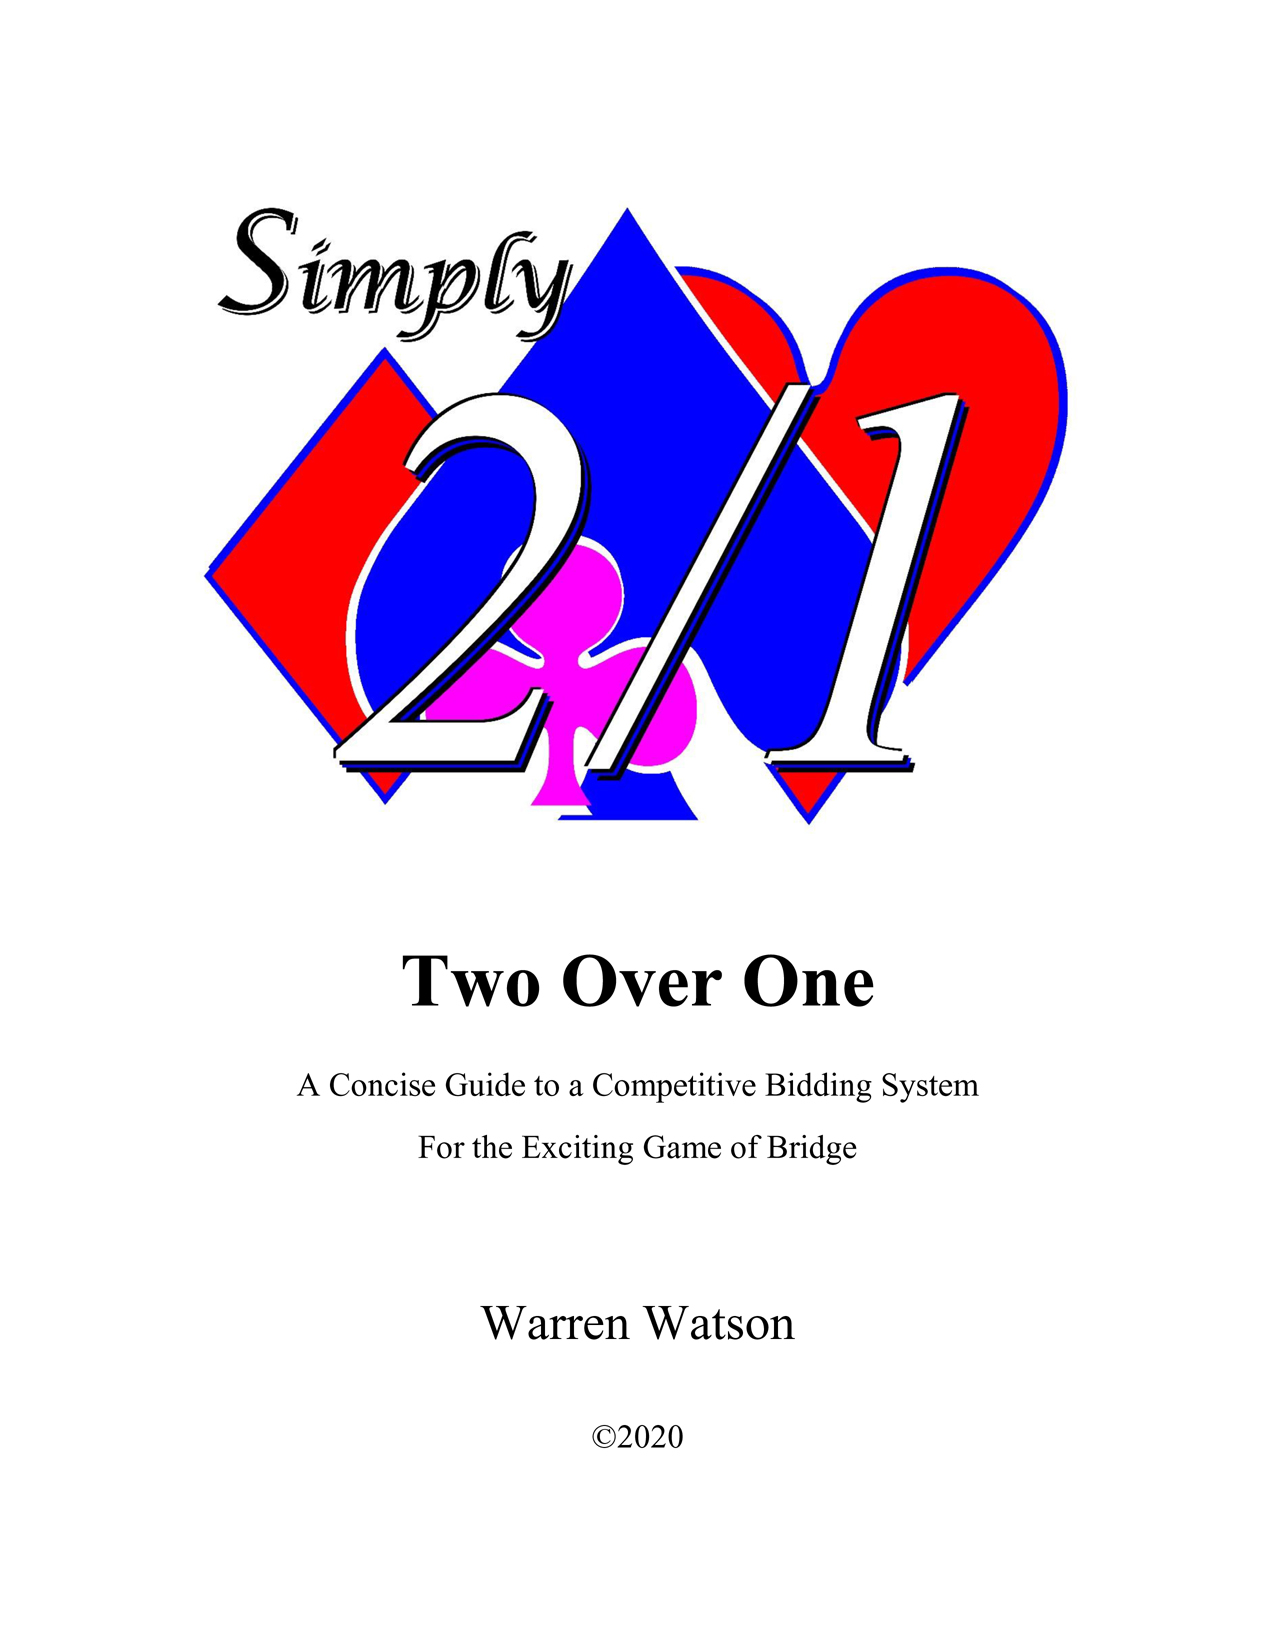 A concise and complete guide to the Two Over One bidding system